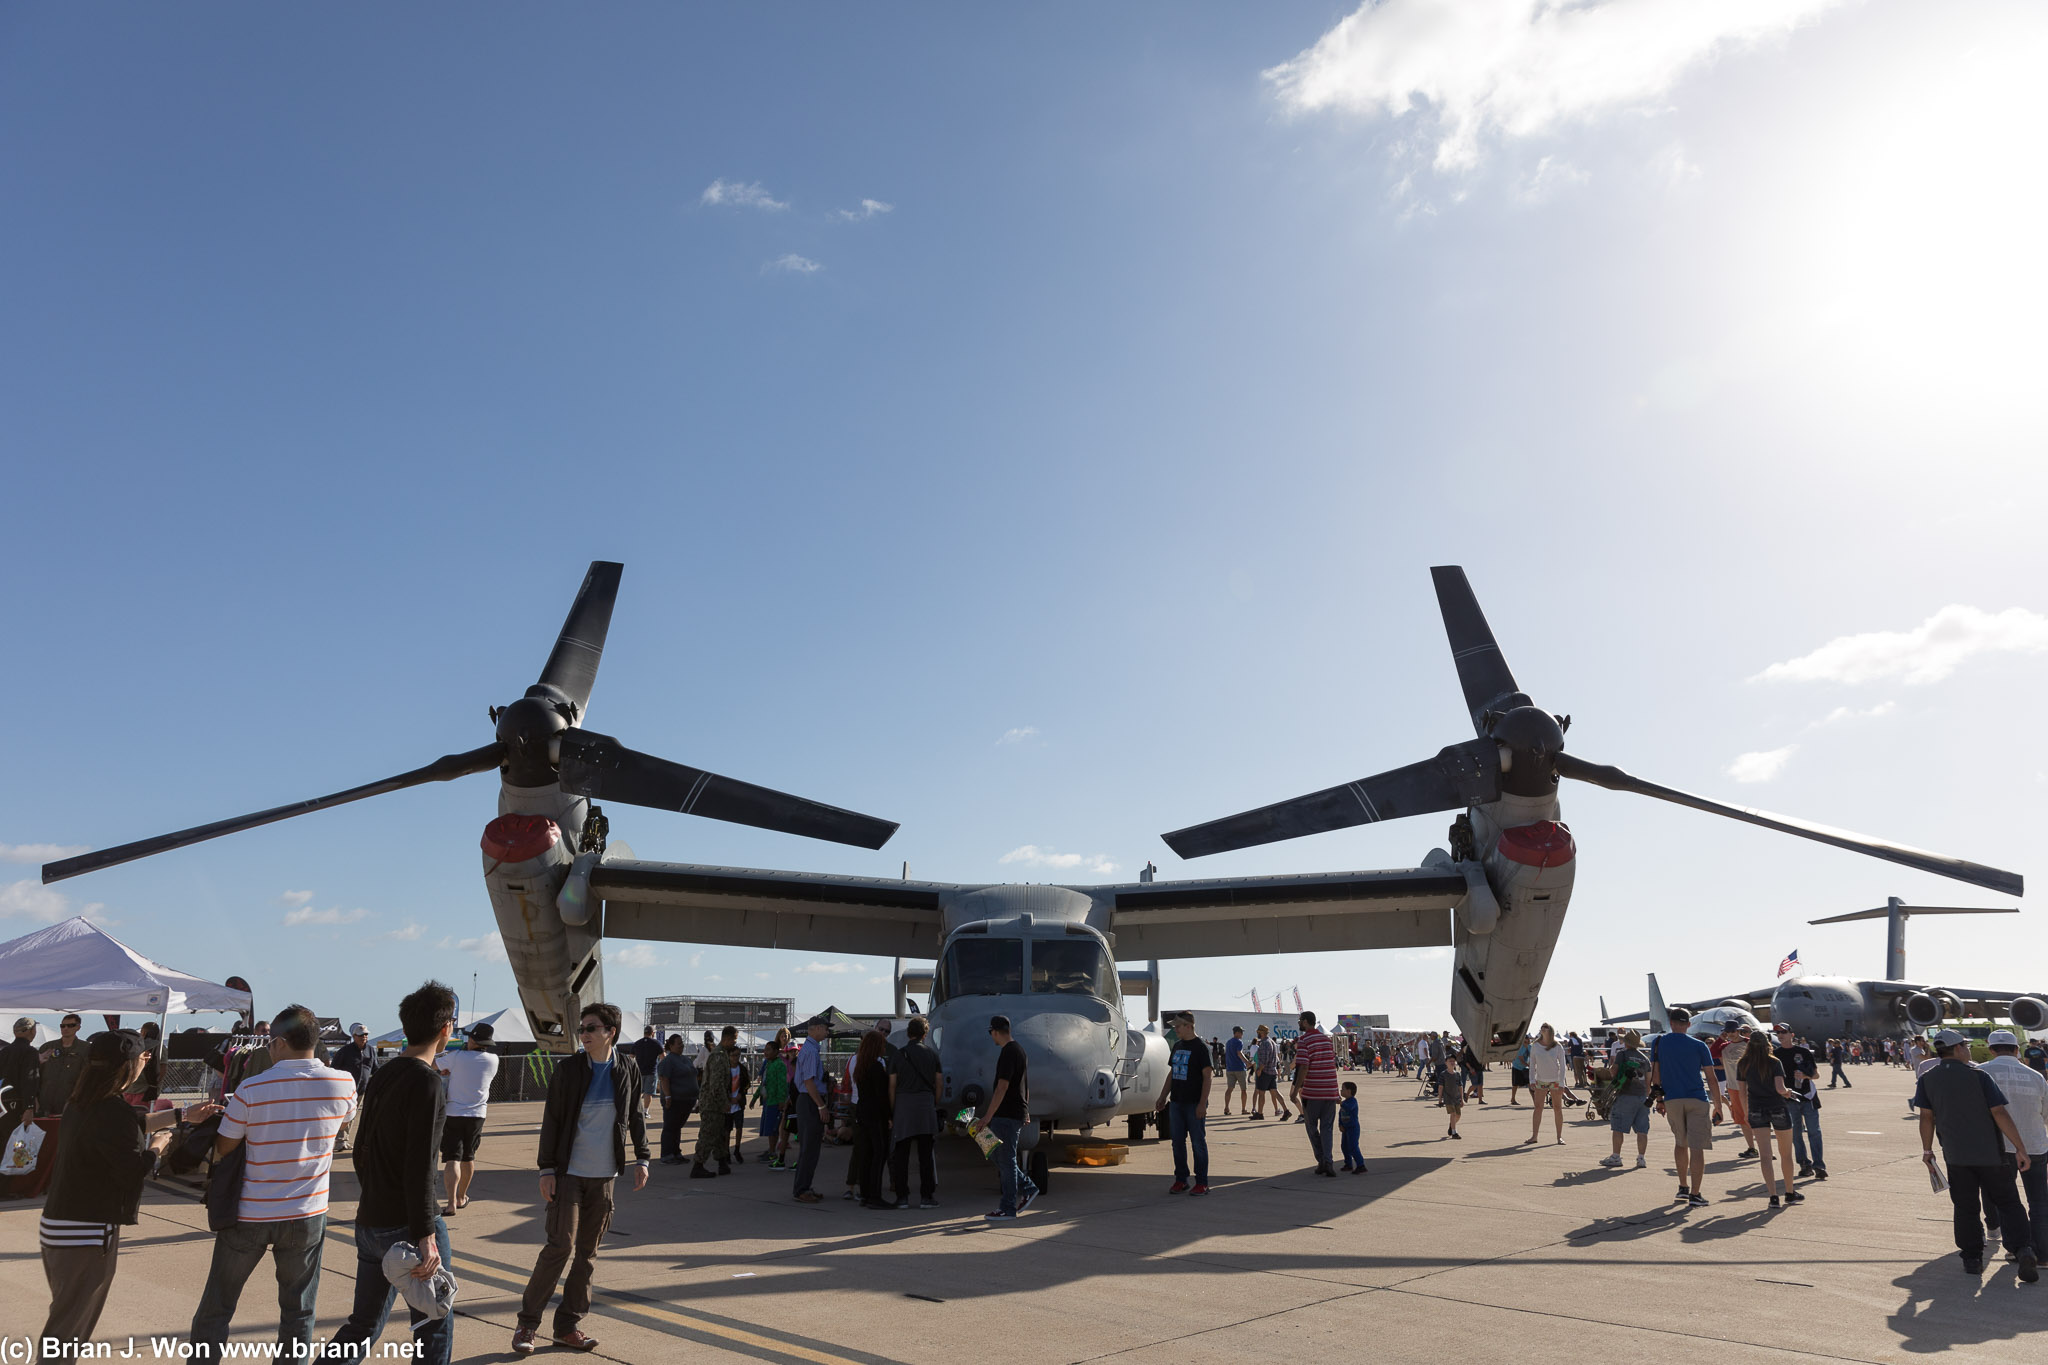 Head-on view of a parked MV-22 Osprey.